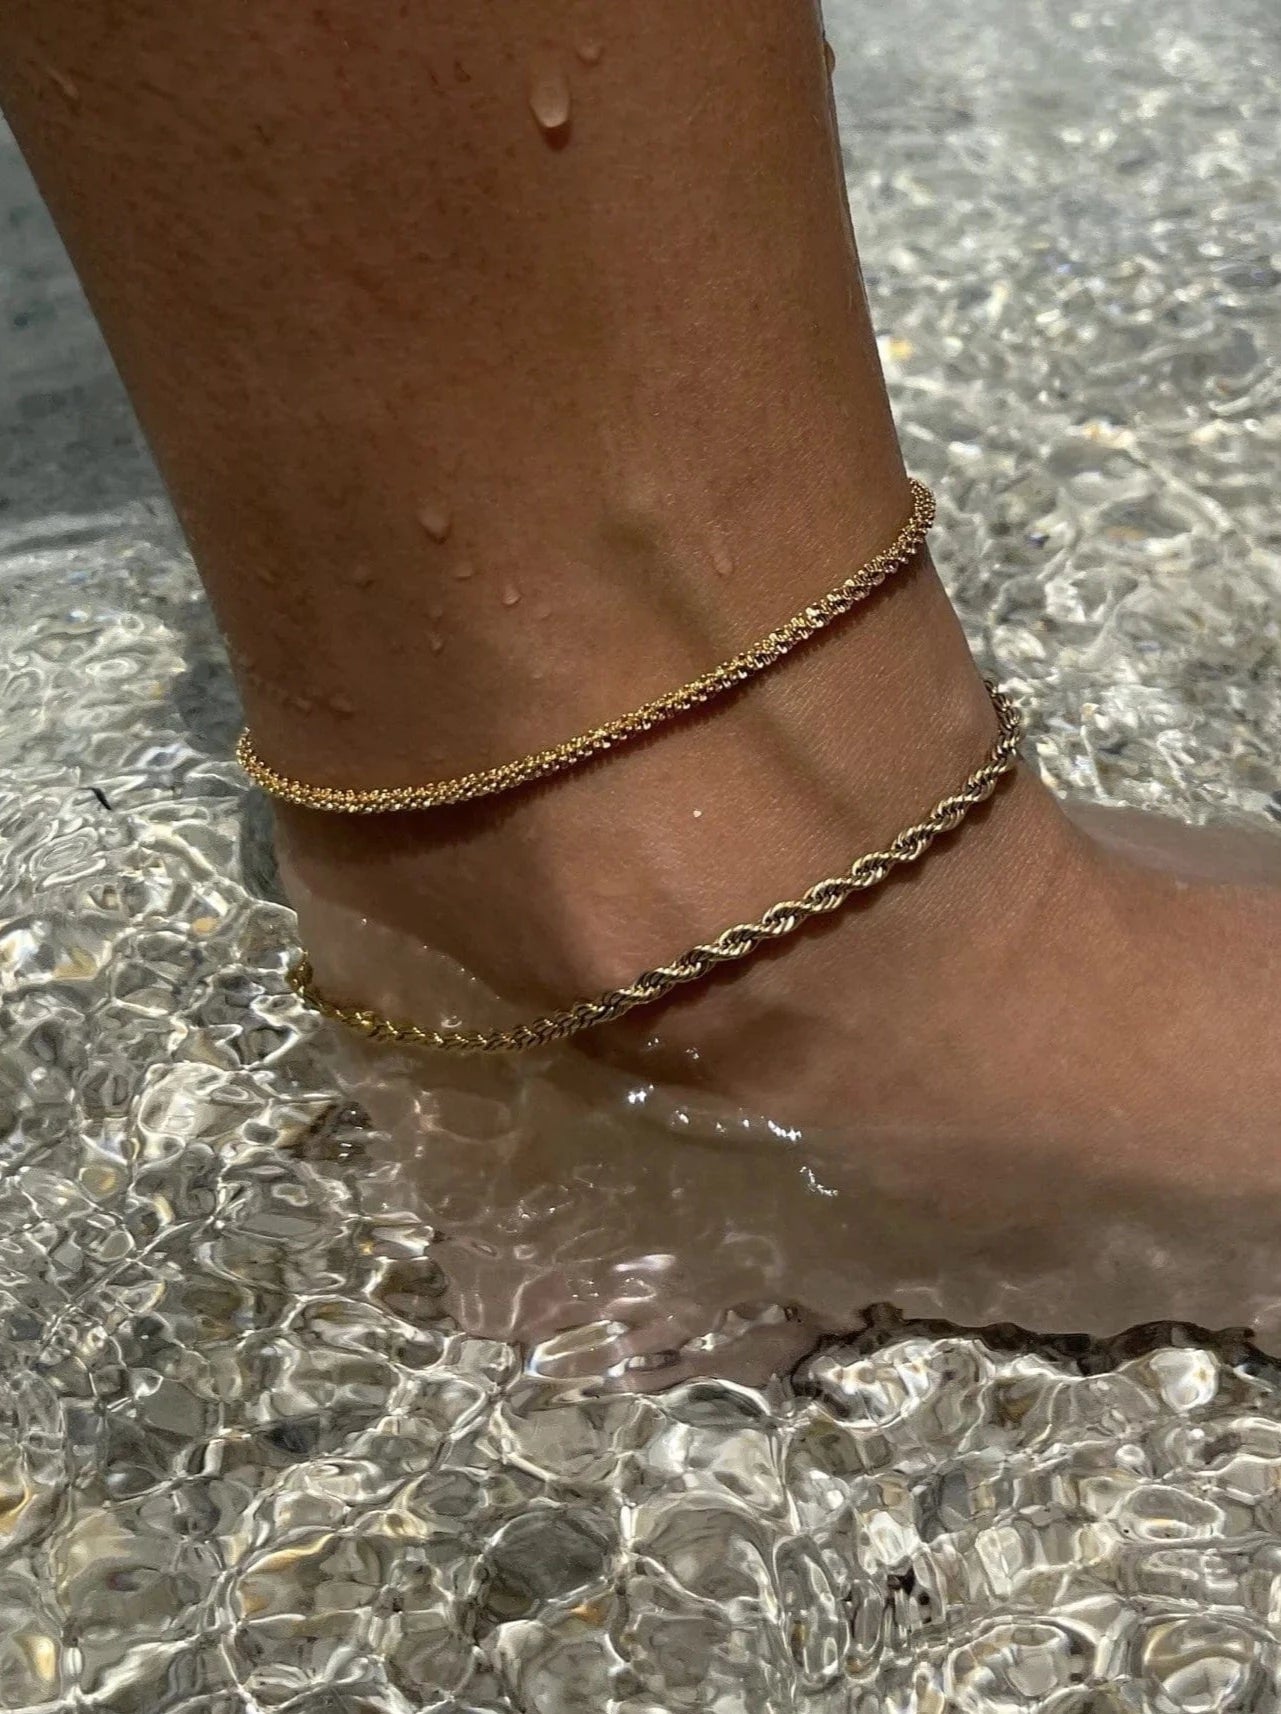 Ellie Vail earrings Tate Rope Chain // ANKLET